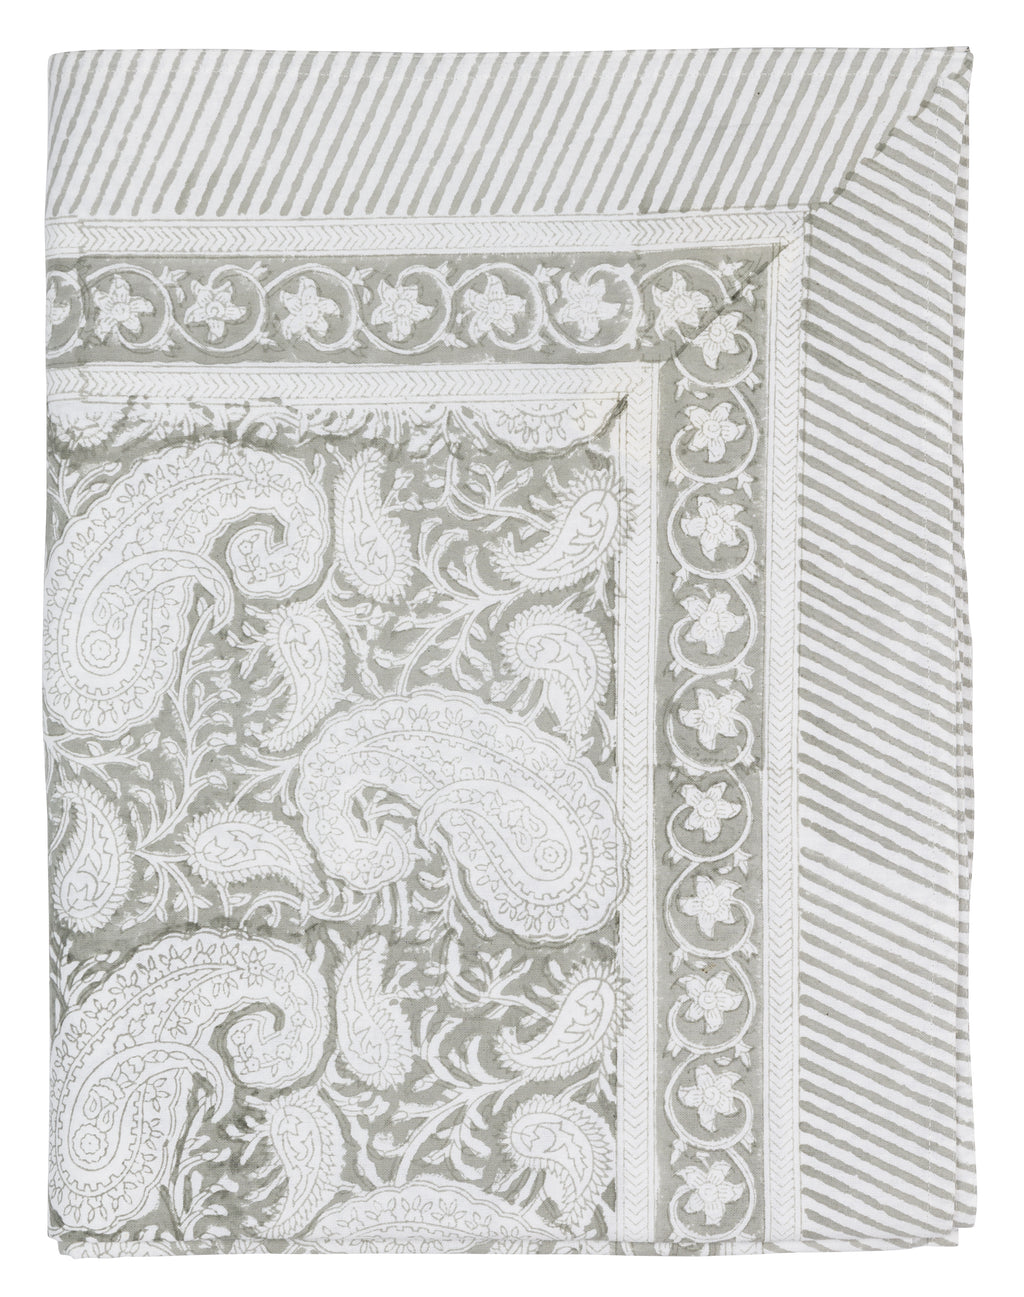 Tablecloth with Big Paisley® print in Light Grey